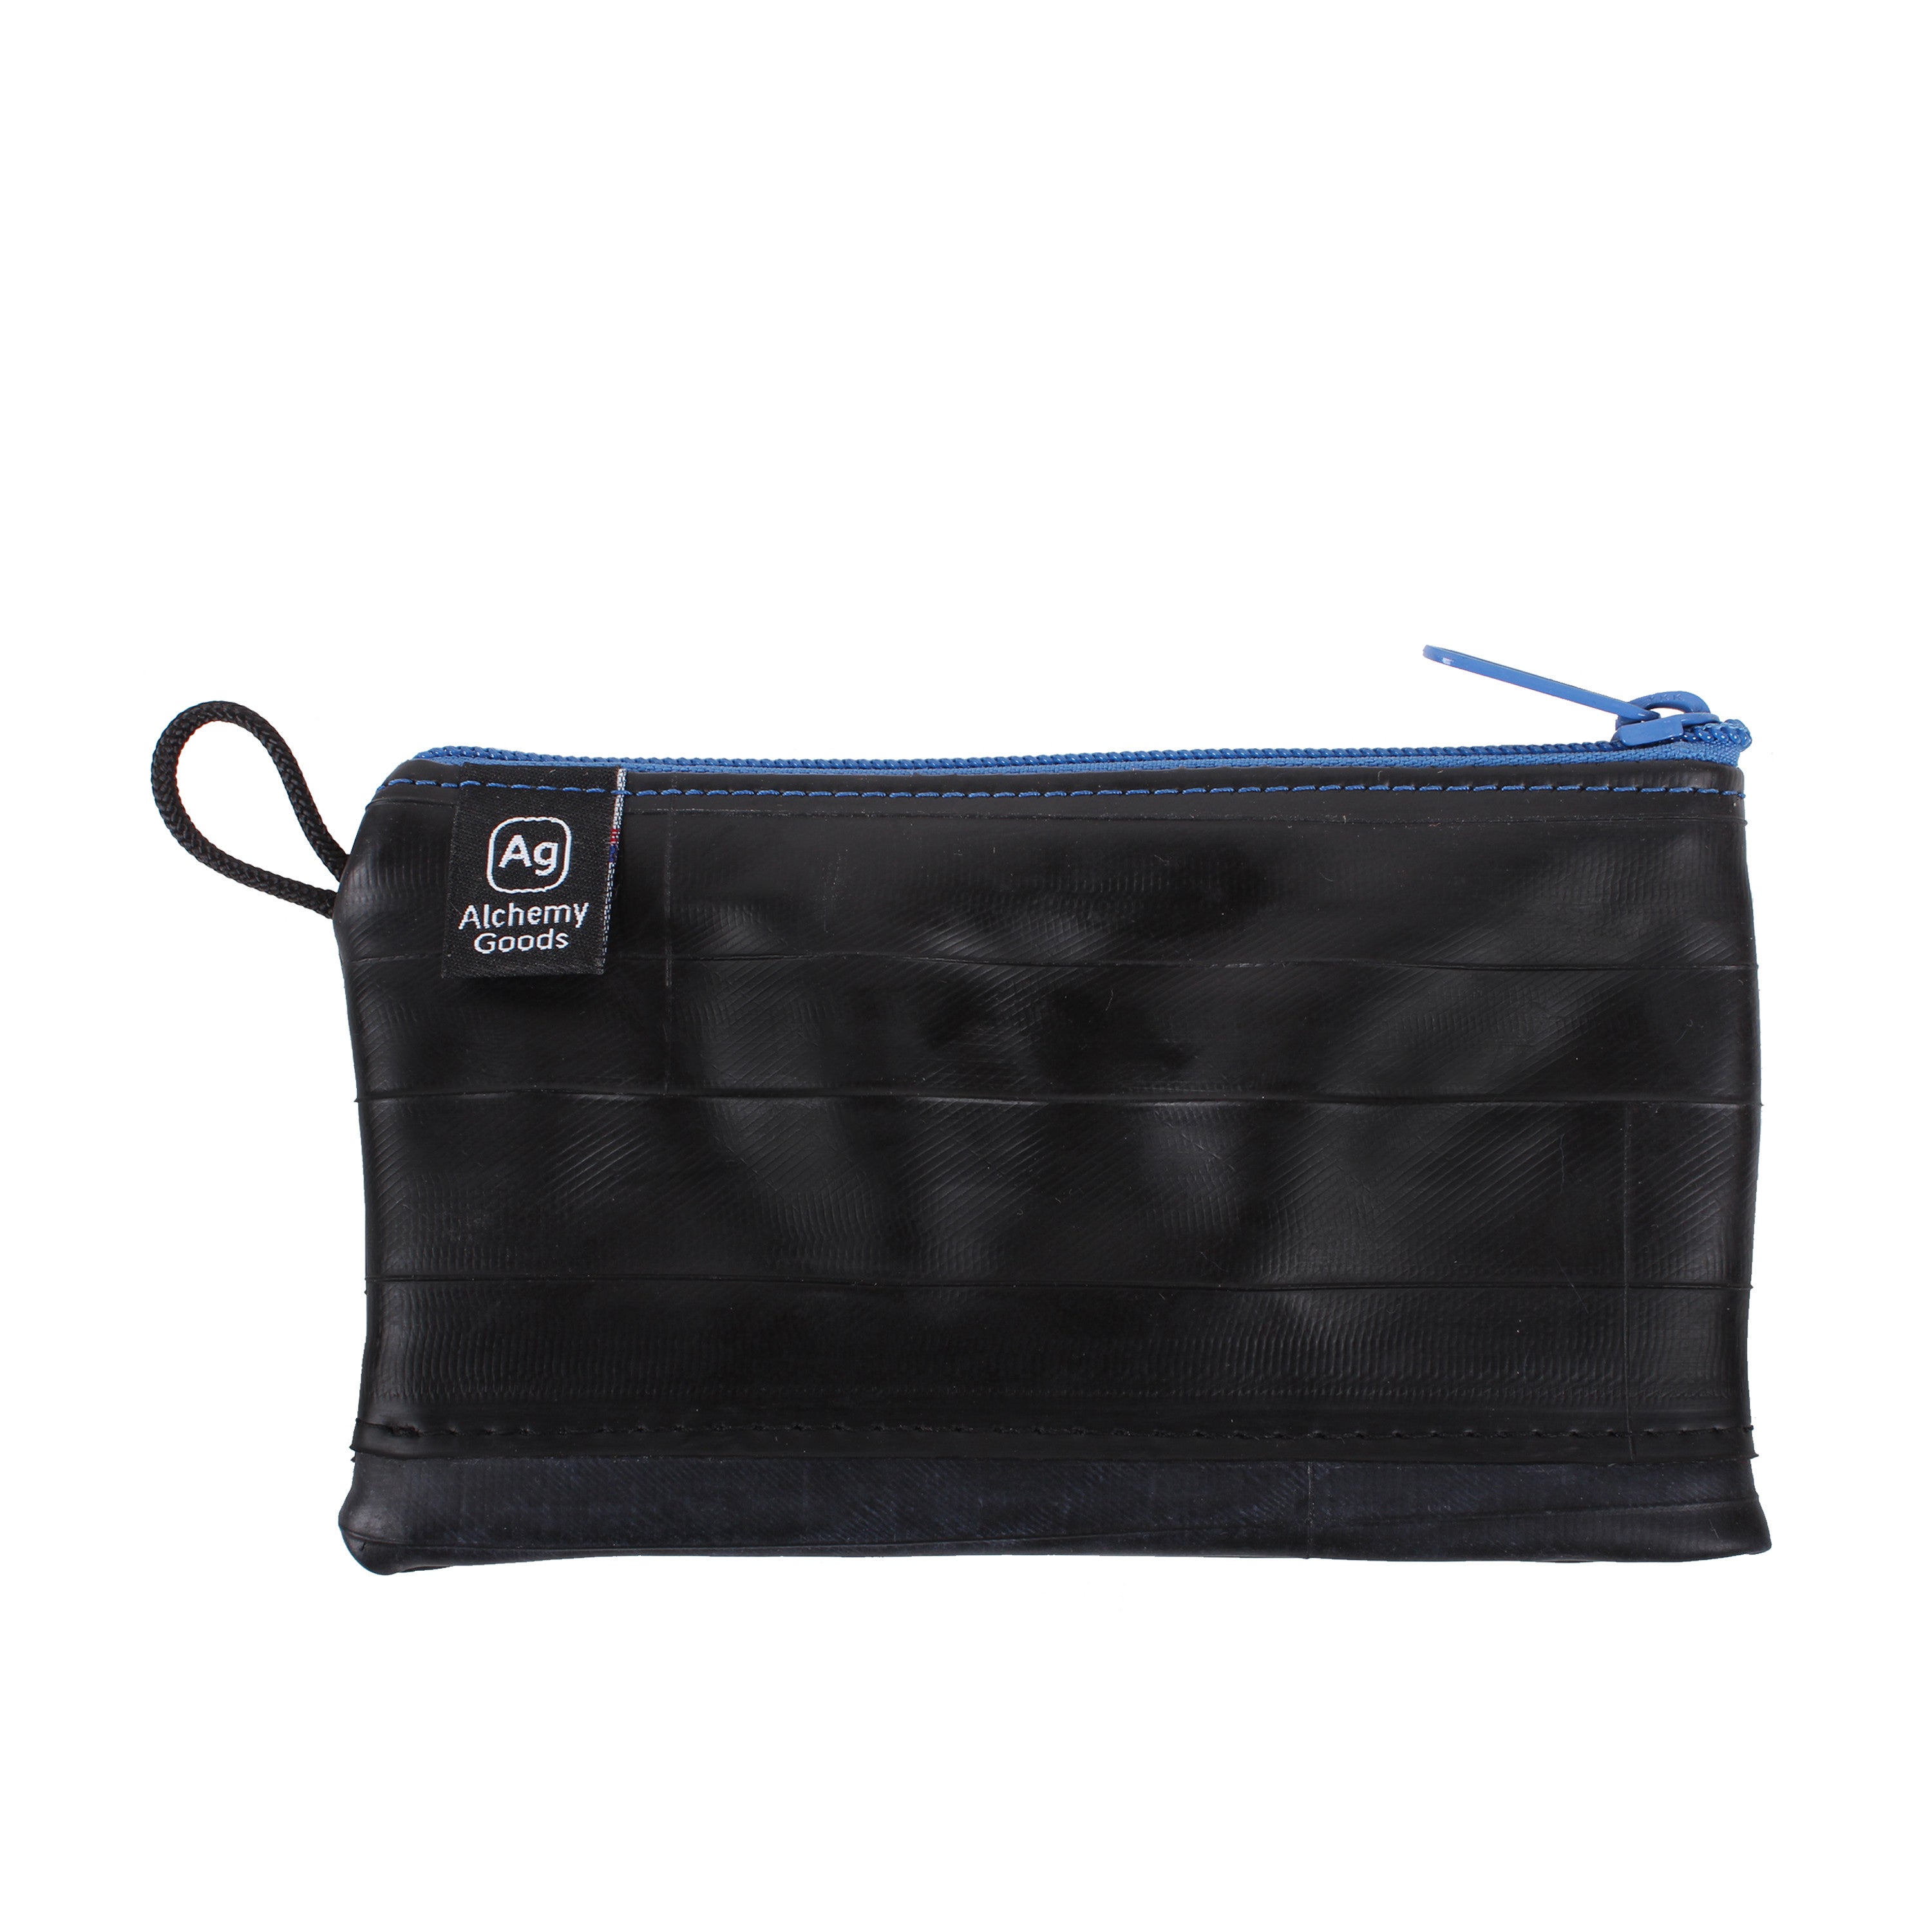 Boat and Tote Zip Pouch | Toiletry Bags & Organizers at L.L.Bean